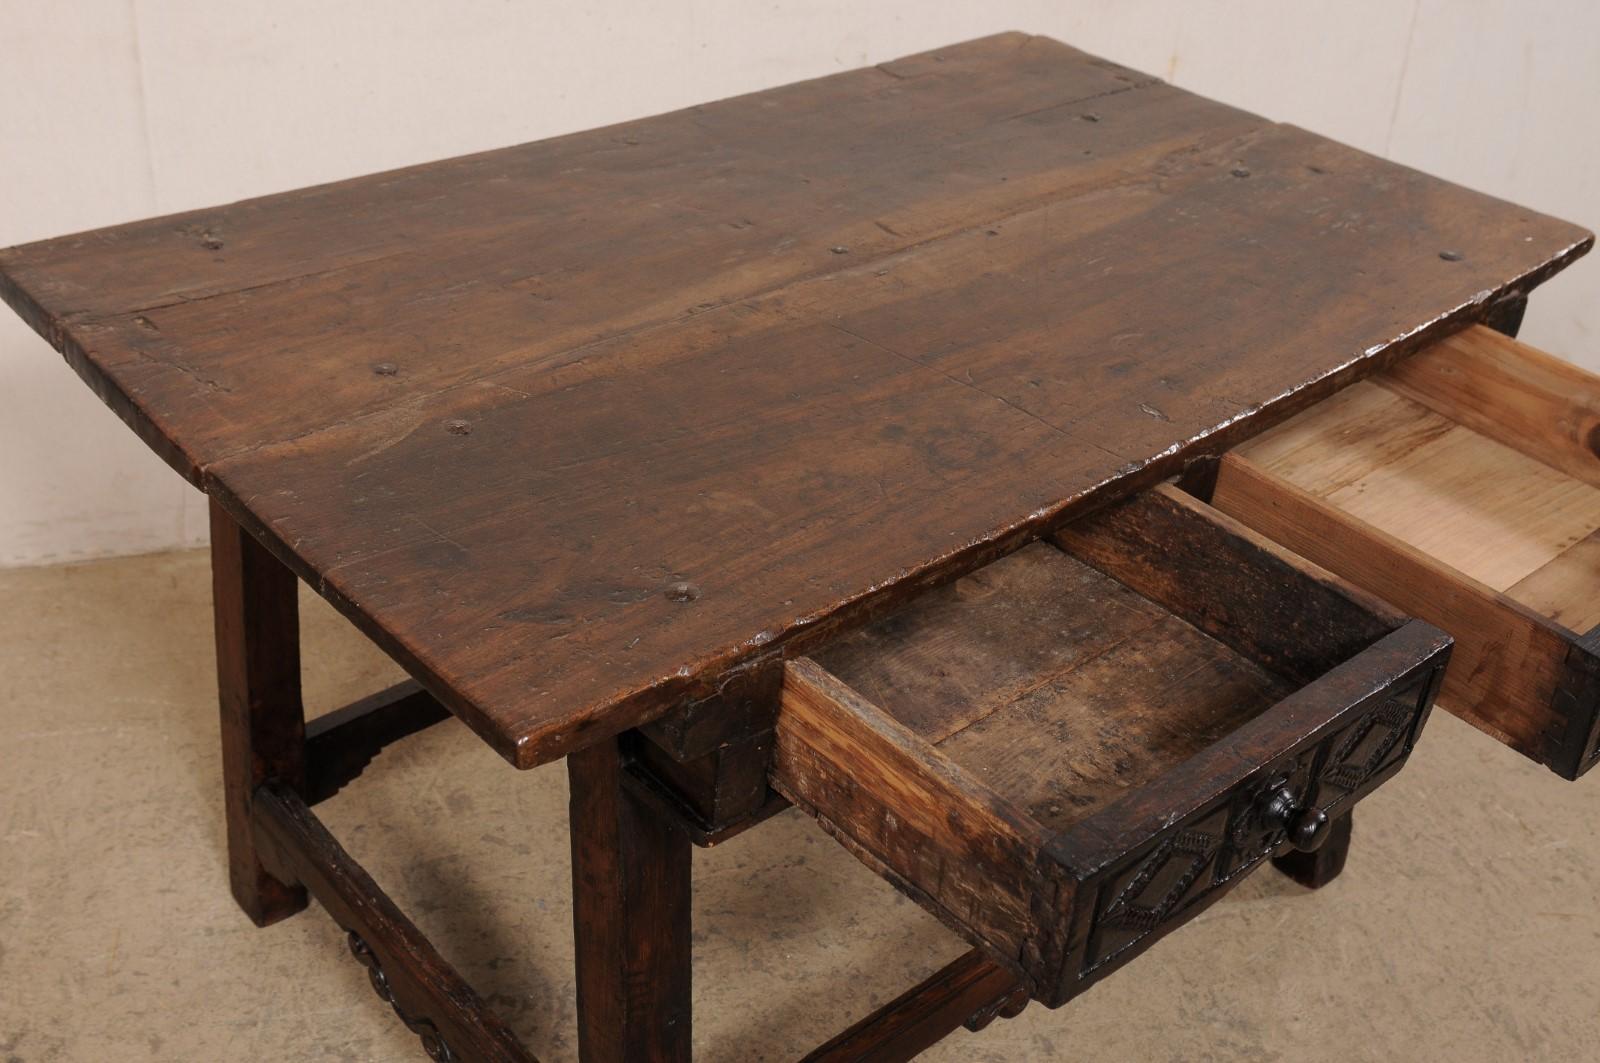 18th Century Spanish Walnut Table W/Two Drawers & a Nicely-Carved Box Stretcher  For Sale 3